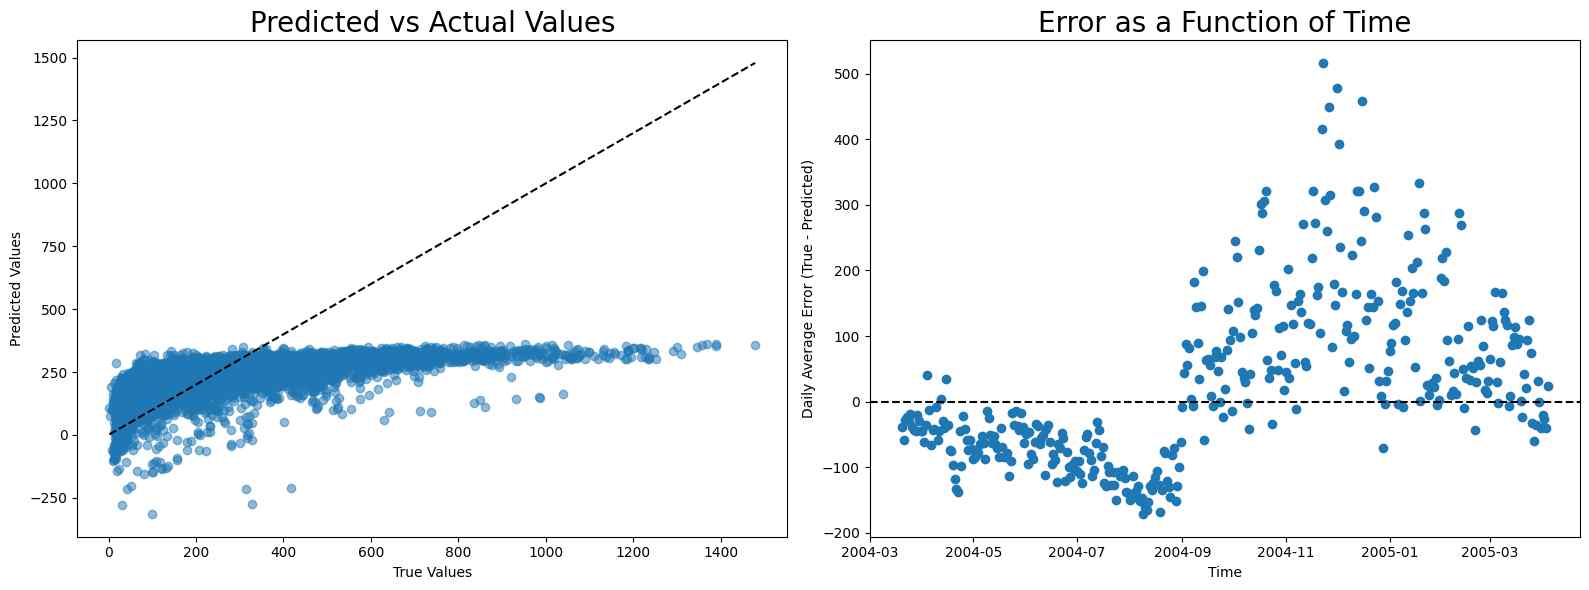 The fitting result of NOx using linear regression and the error as a function of time.